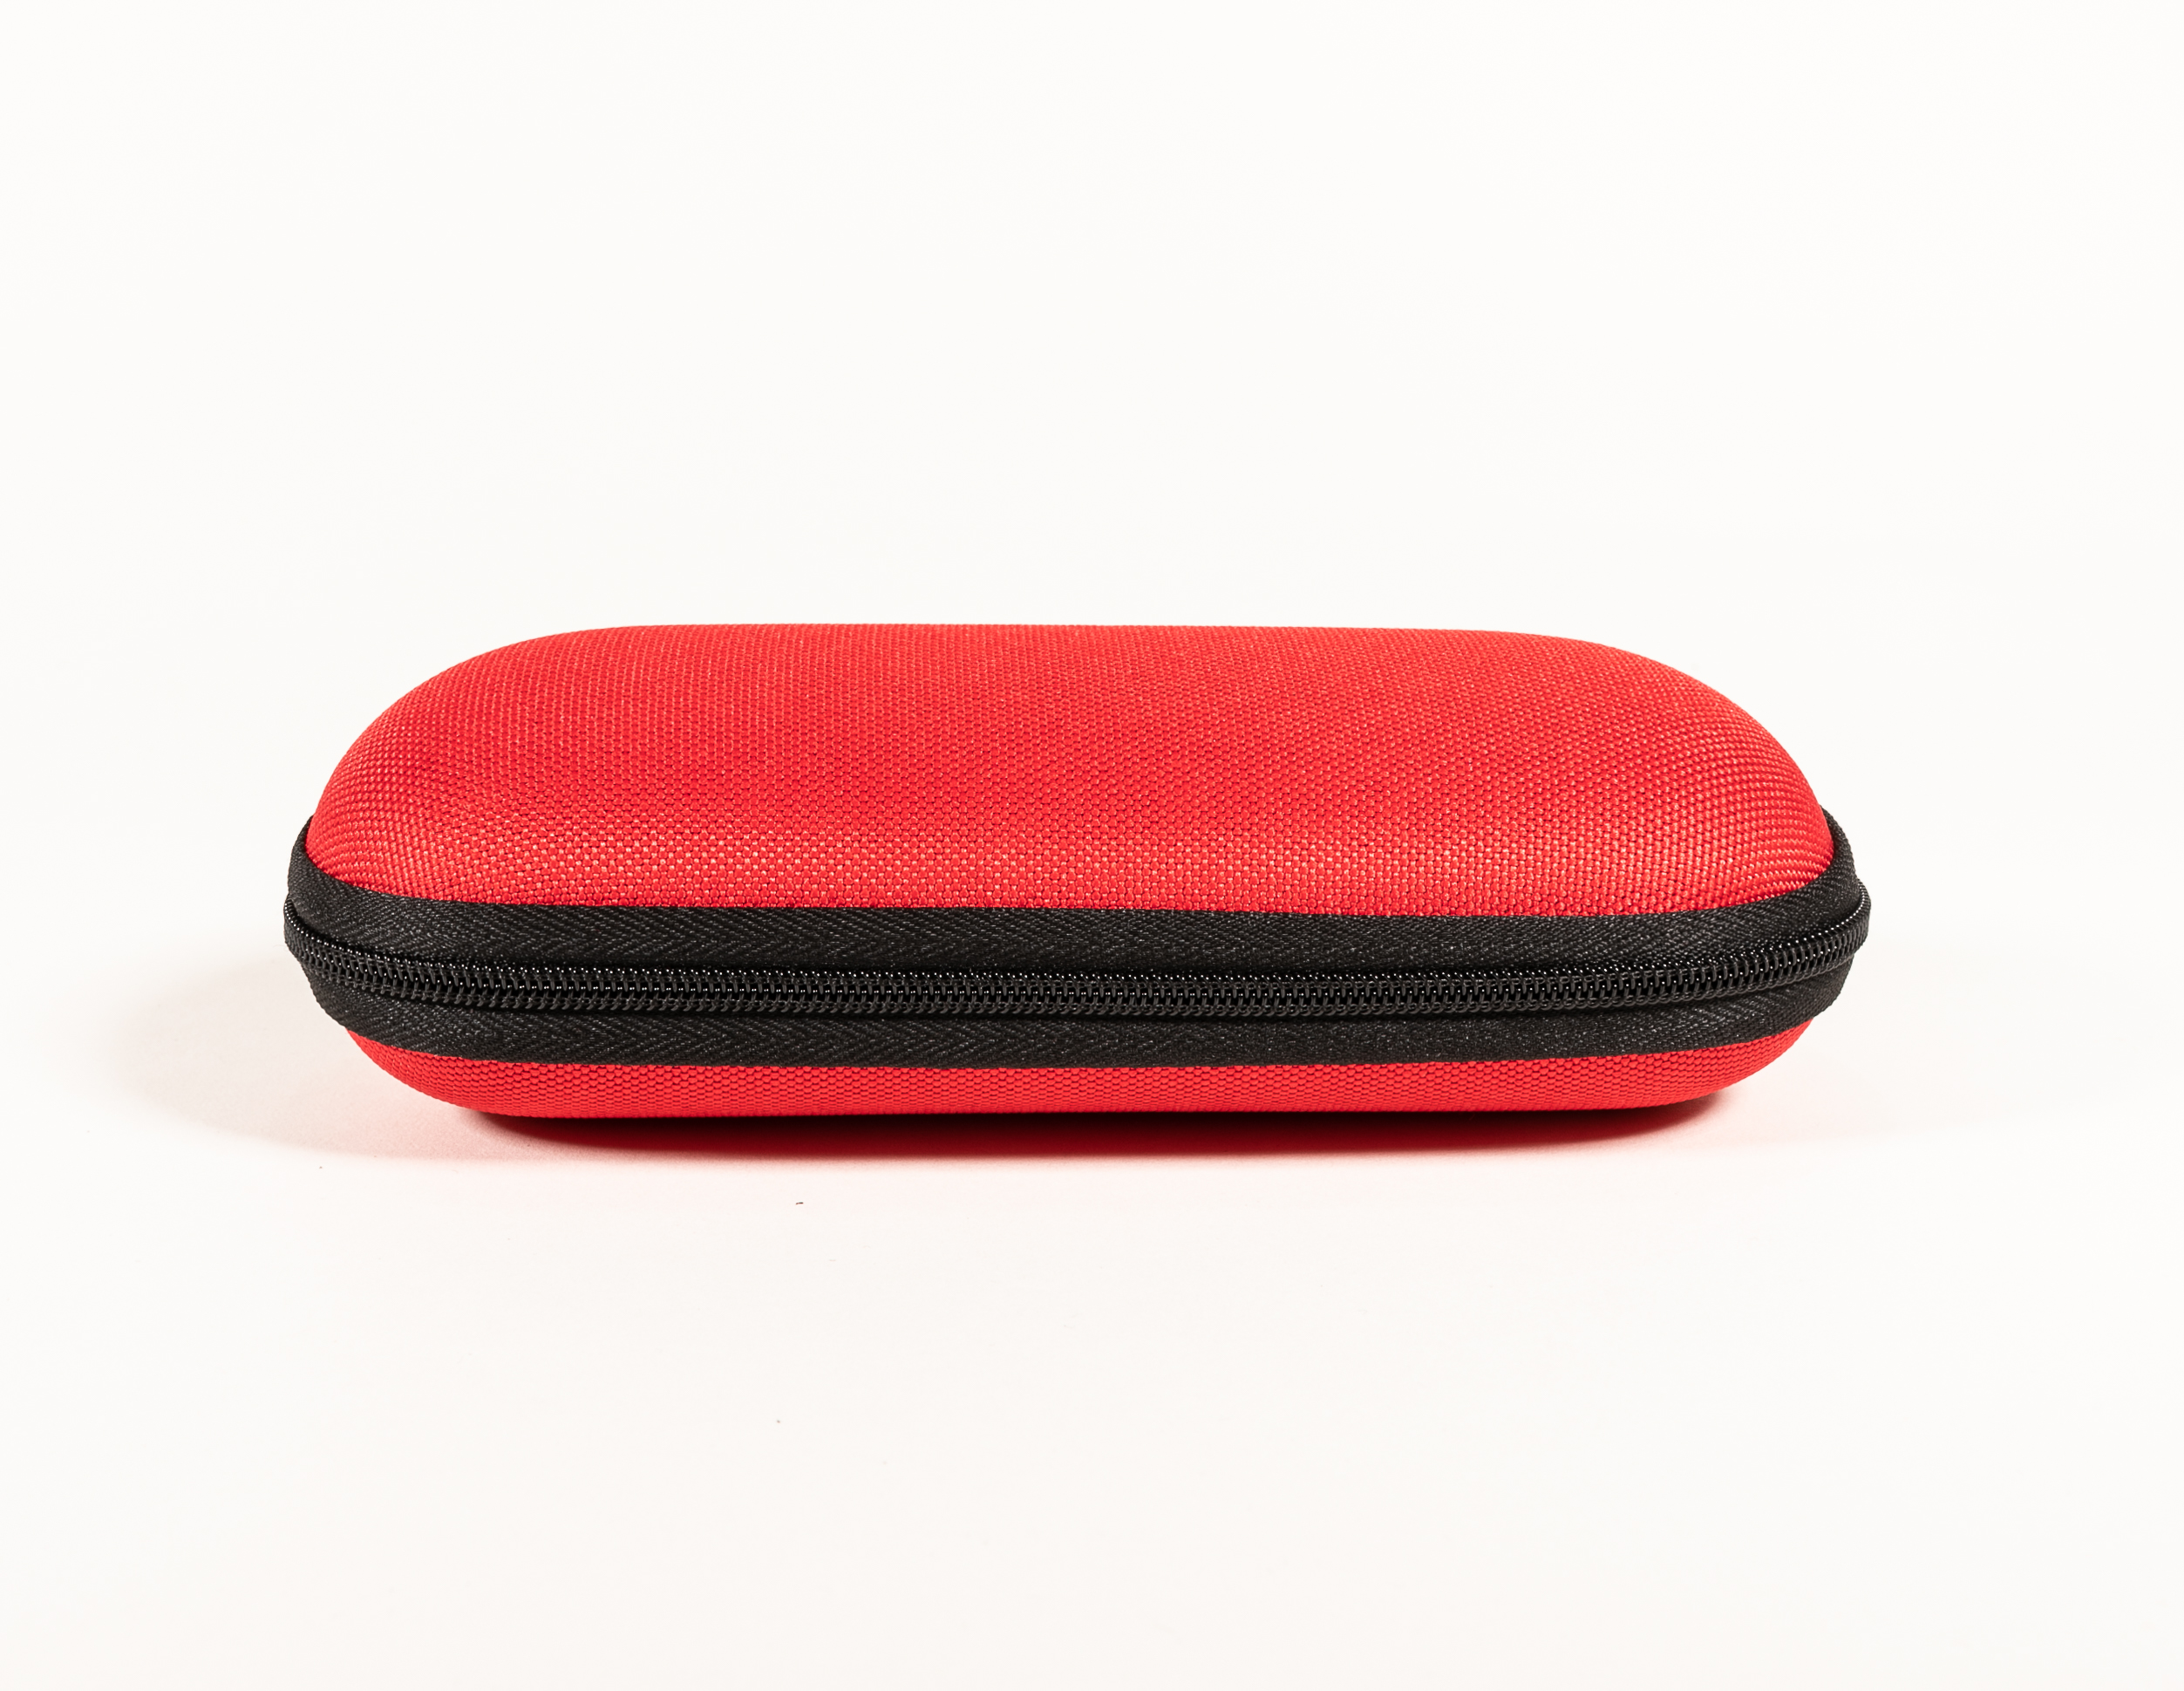 2021 Glasses Case Sunglasses in Two Colors of A Zip Chain Type Glasses Case